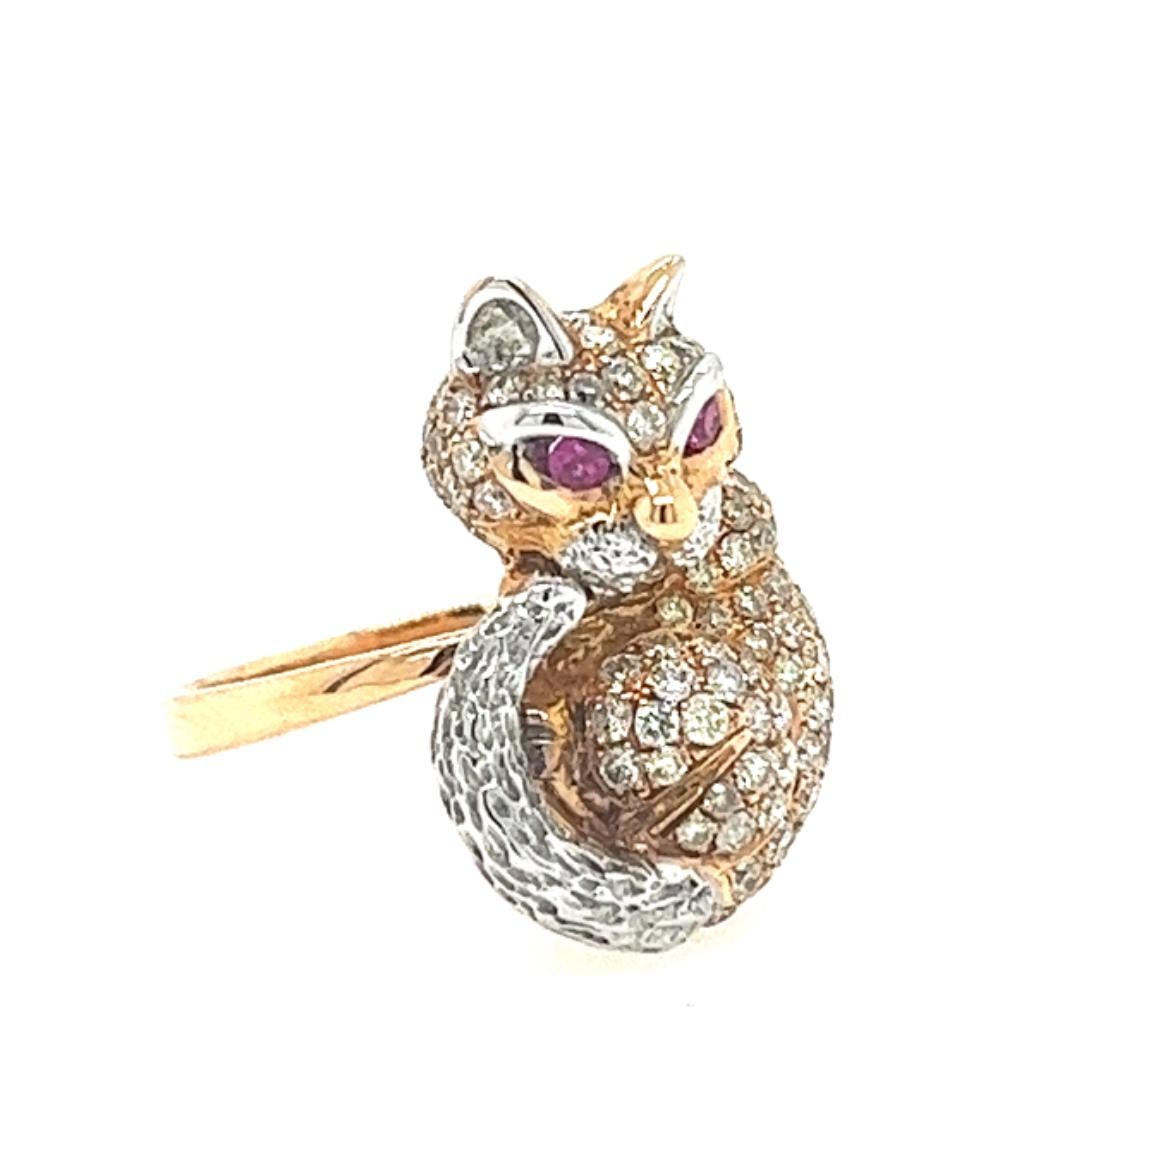 18K Gold Fancy Diamond Fox Ring with Rubies

92 Fancy Diamonds - 0.96 CT
2 Rubies - 0.07 CT
18K Rose Gold - 5.26 GM

This exquisite 18K gold ring features a captivating fox design that exudes elegance and sophistication. The fox's body is